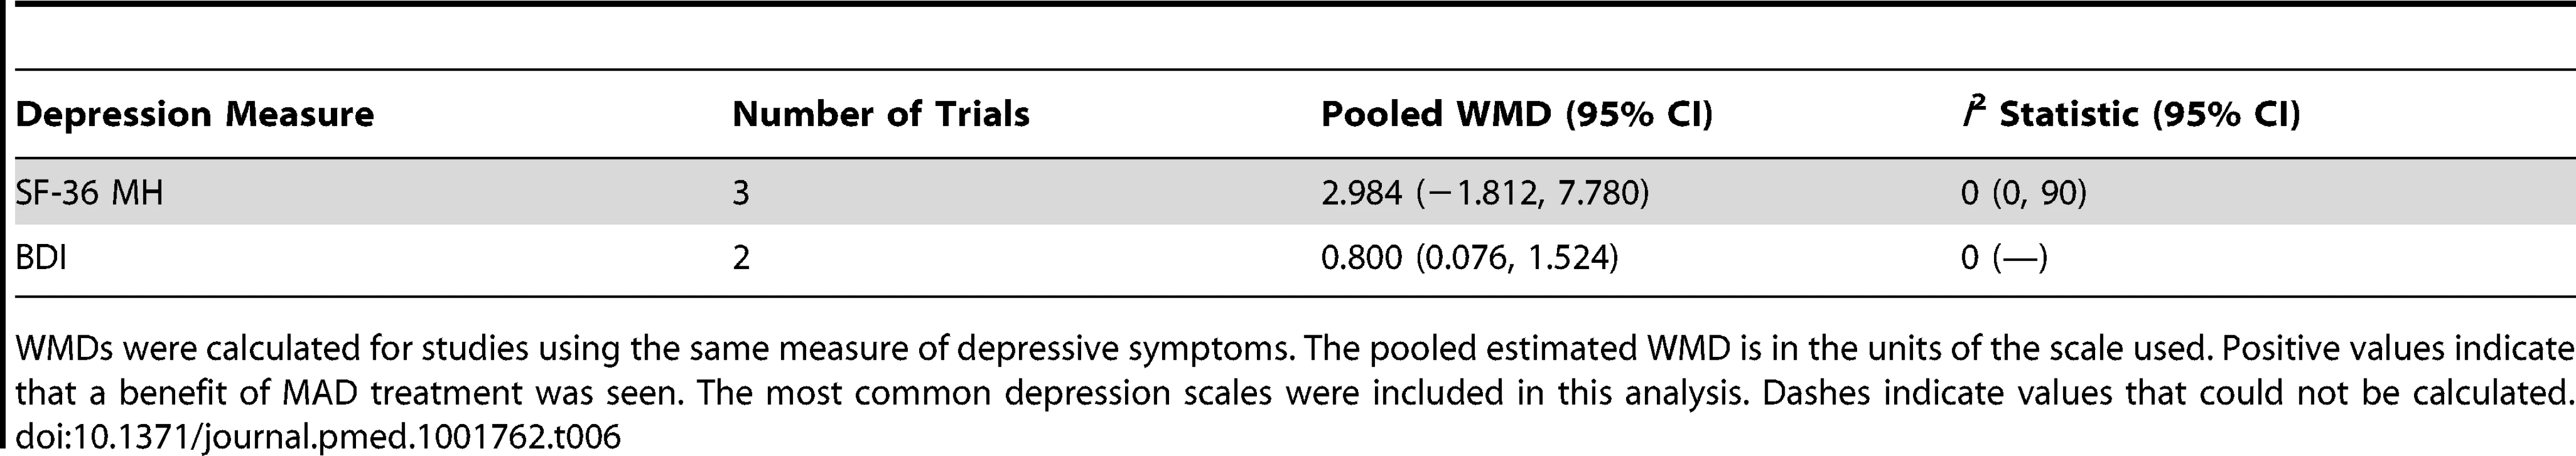 Pooled weighted mean differences in depression score for MAD treatment.